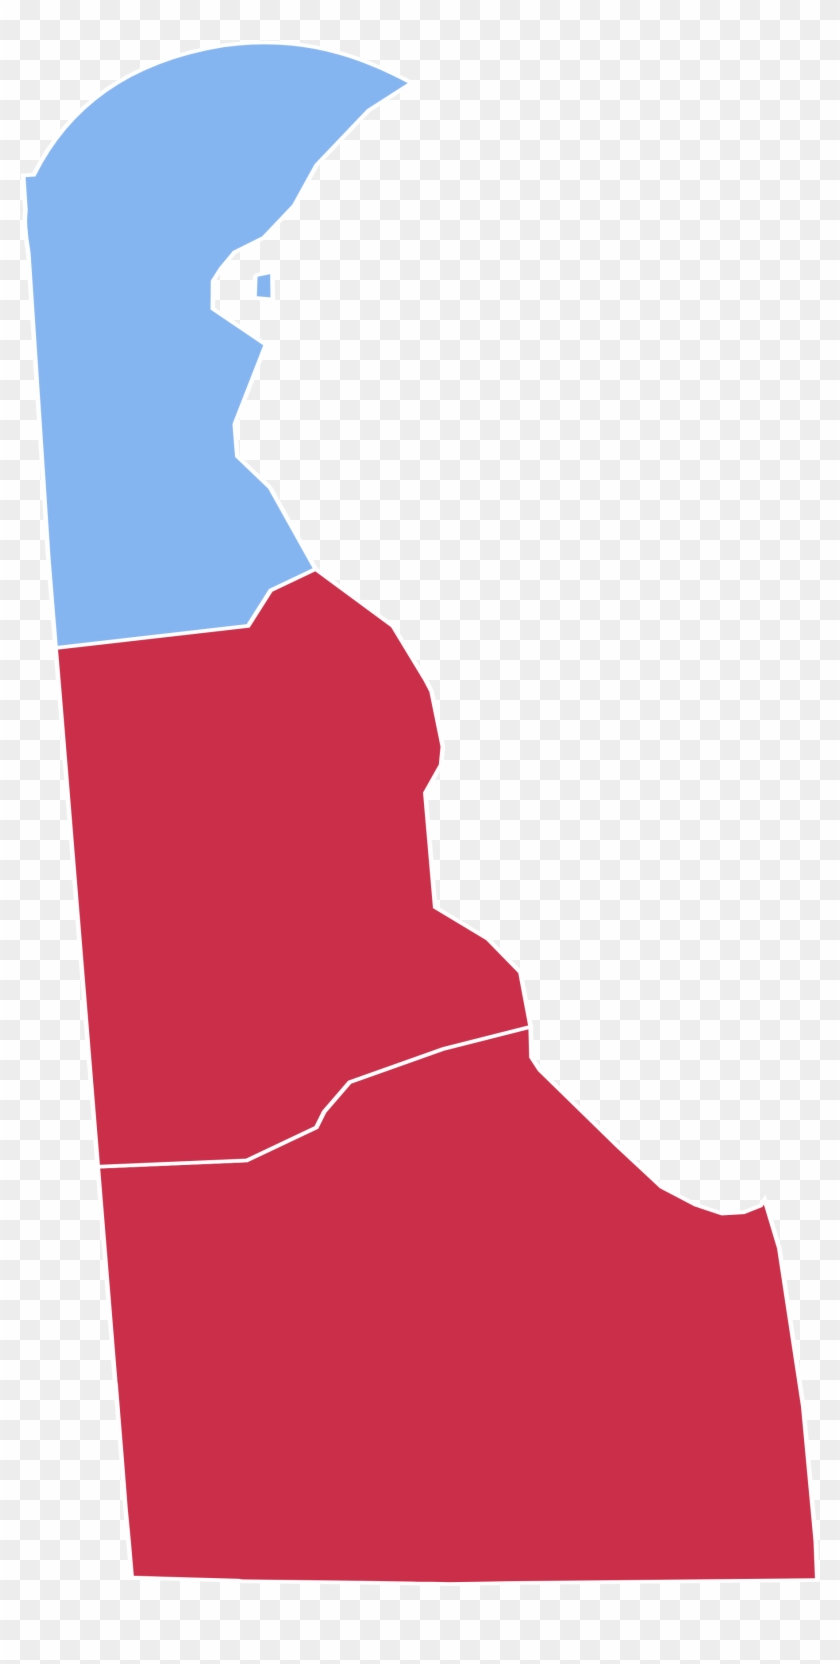 Open - Delaware 2016 Election Results #1212518